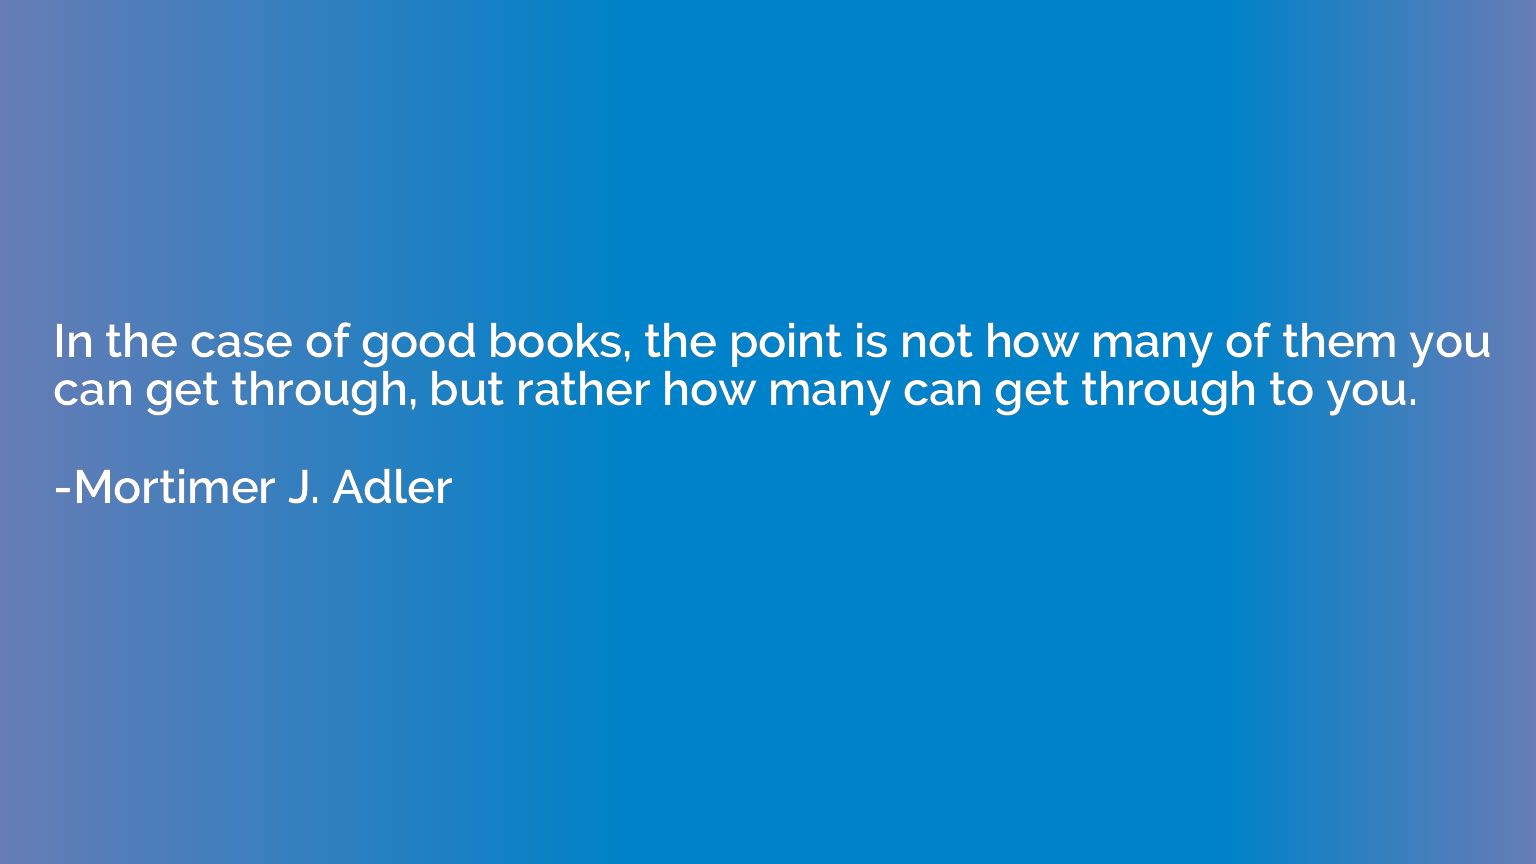 In the case of good books, the point is not how many of them